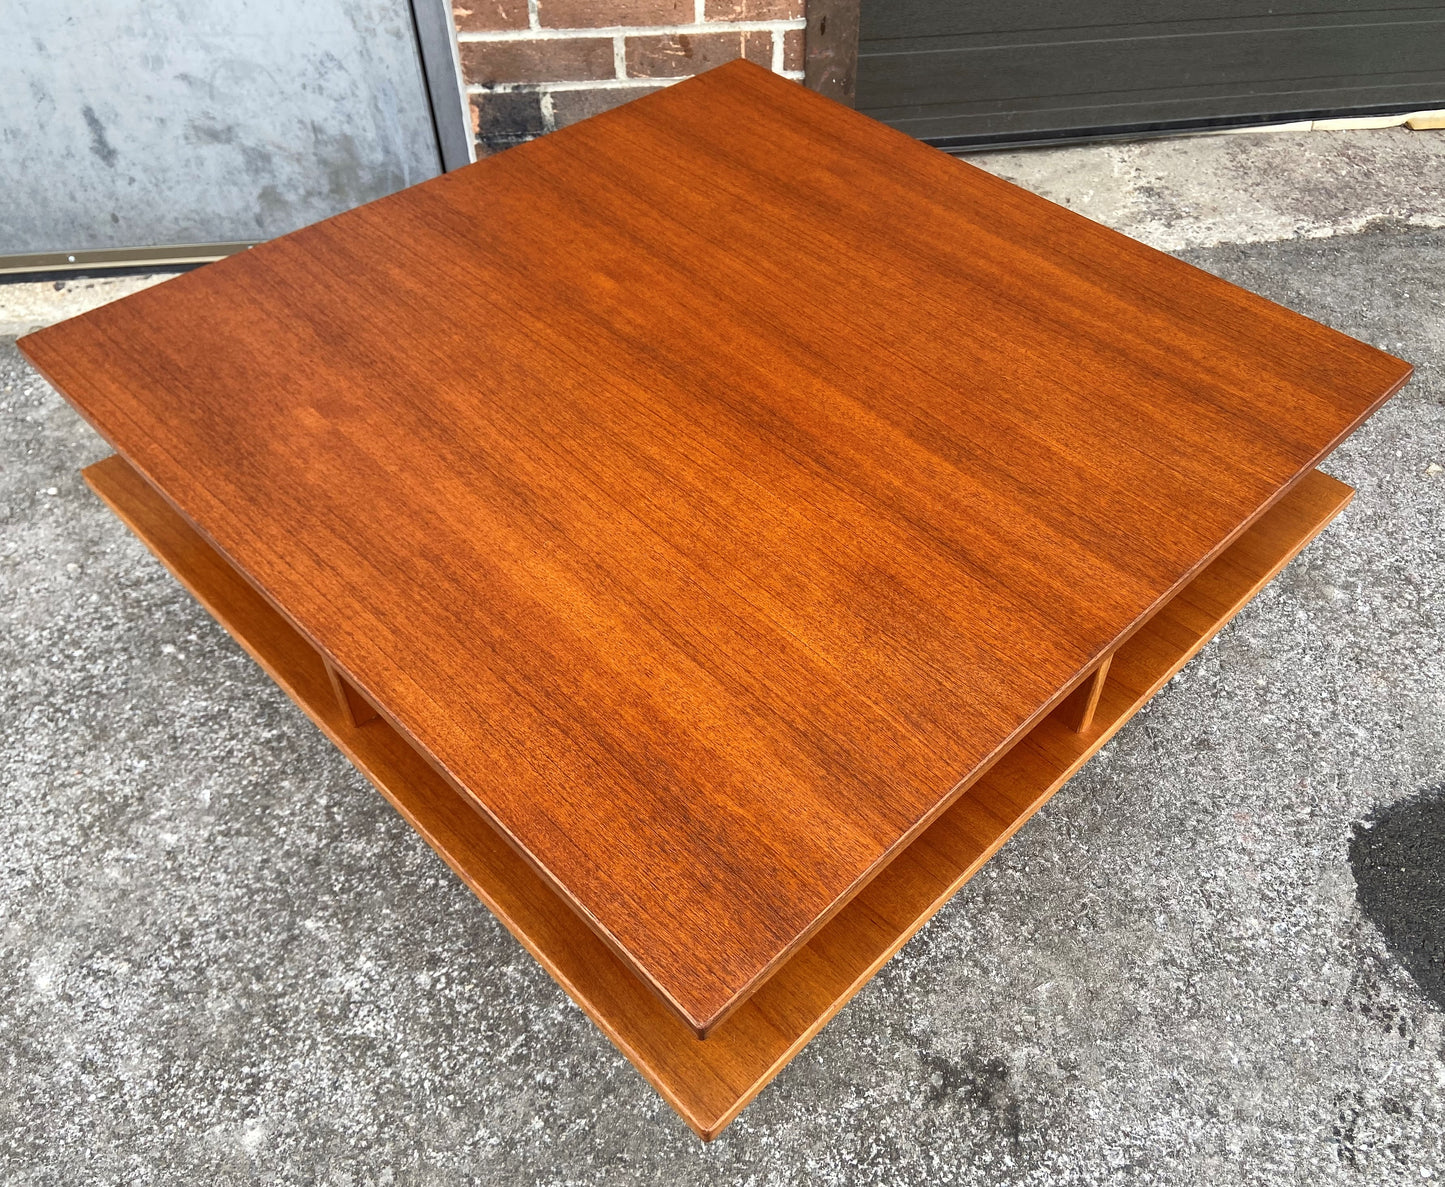 REFINISHED Mid Century Modern Teak Coffee Table Square 2 Tier, Perfect